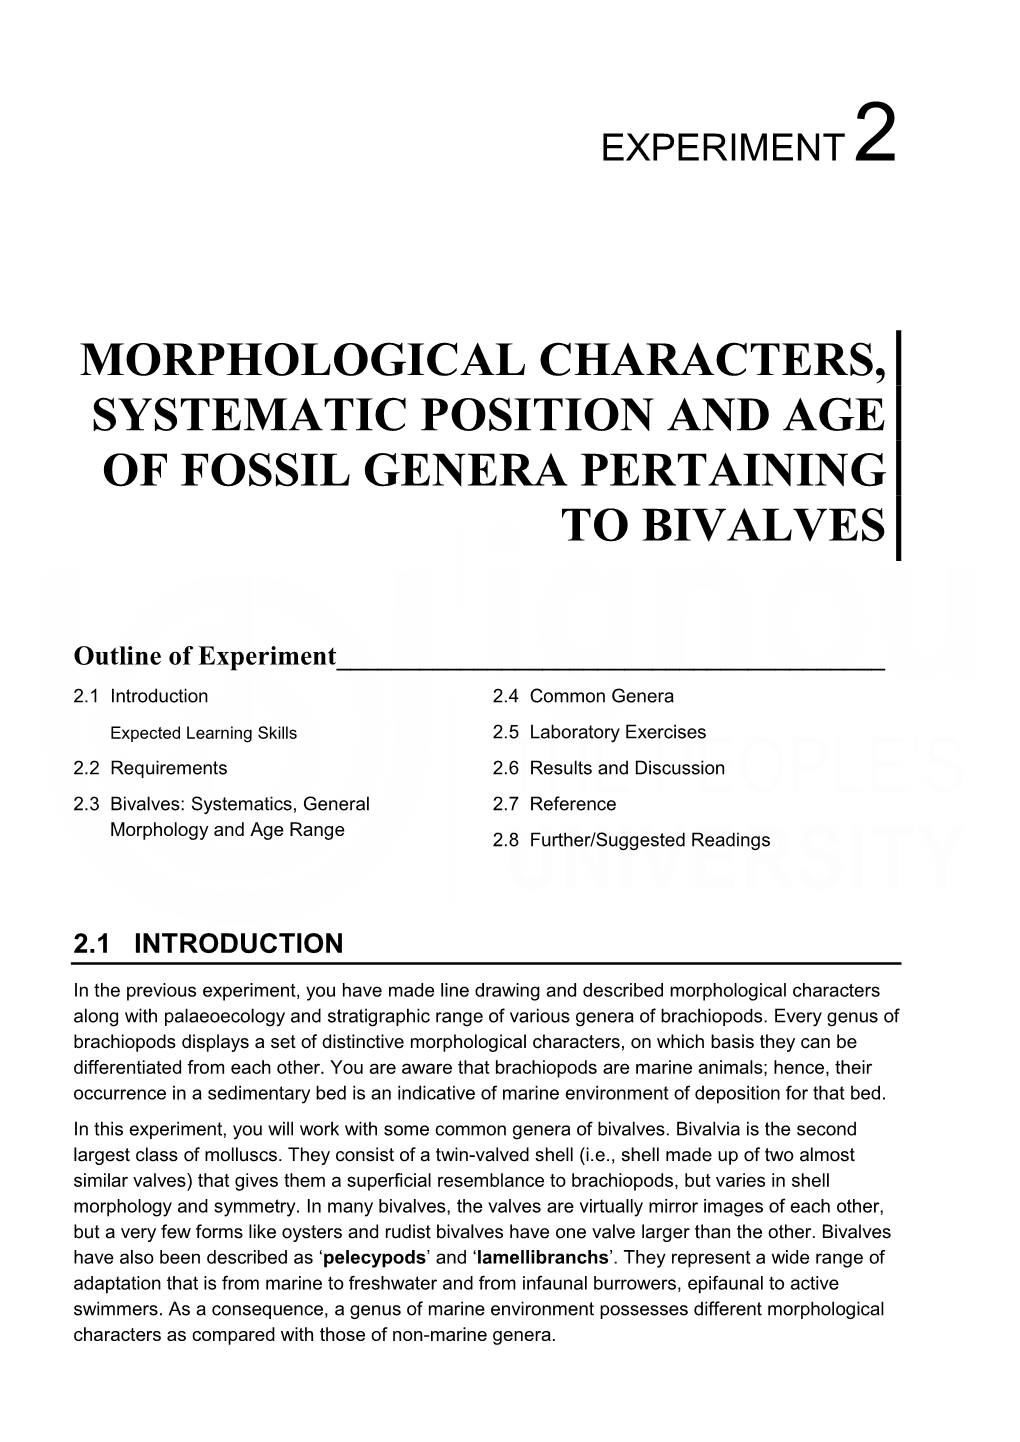 Morphological Characters, Systematic Position and Age of Fossil Genera Pertaining to Bivalves